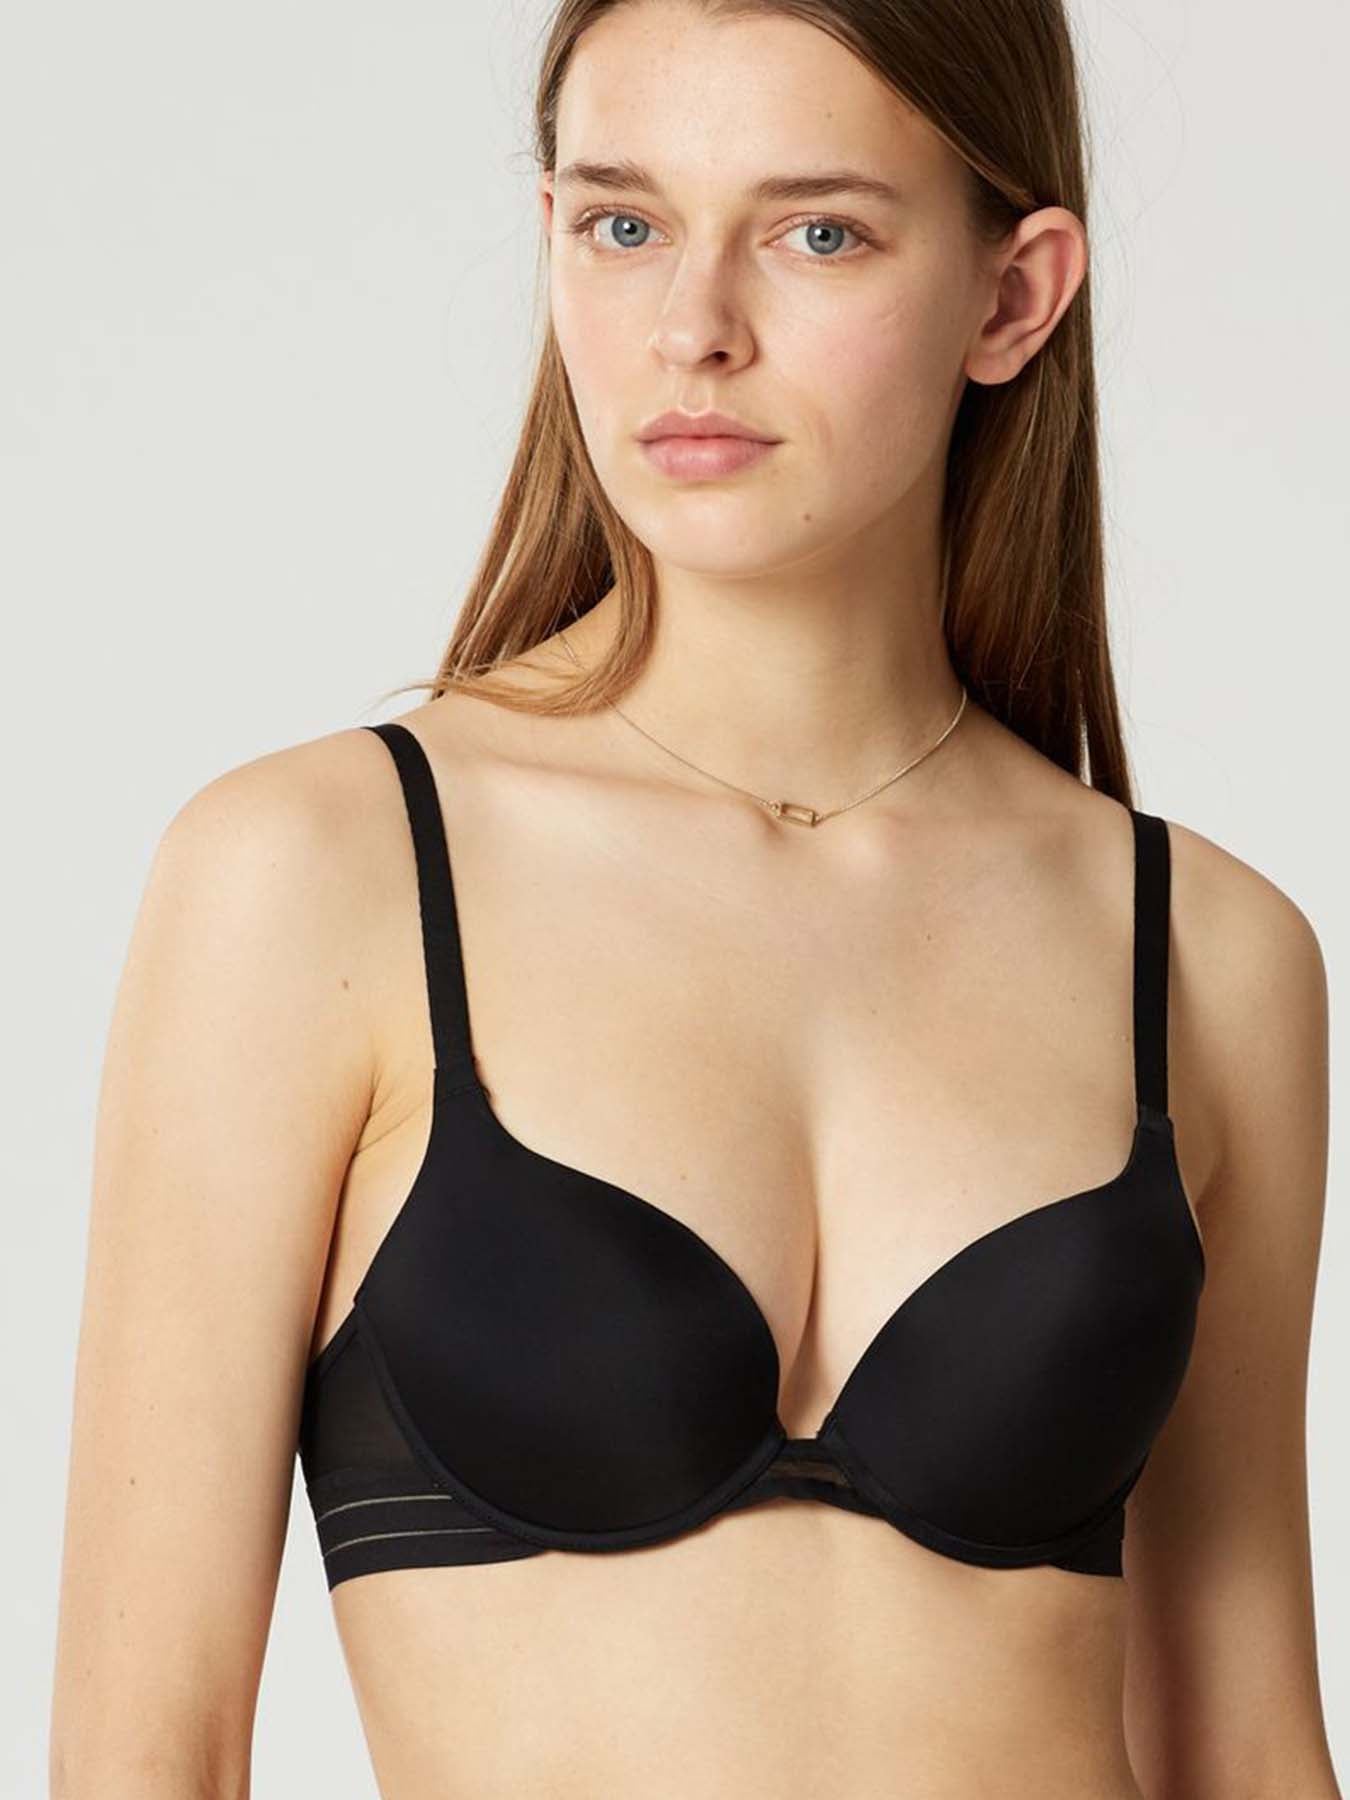 Modell trägt Nufit Push UP BH by Maison Lejaby